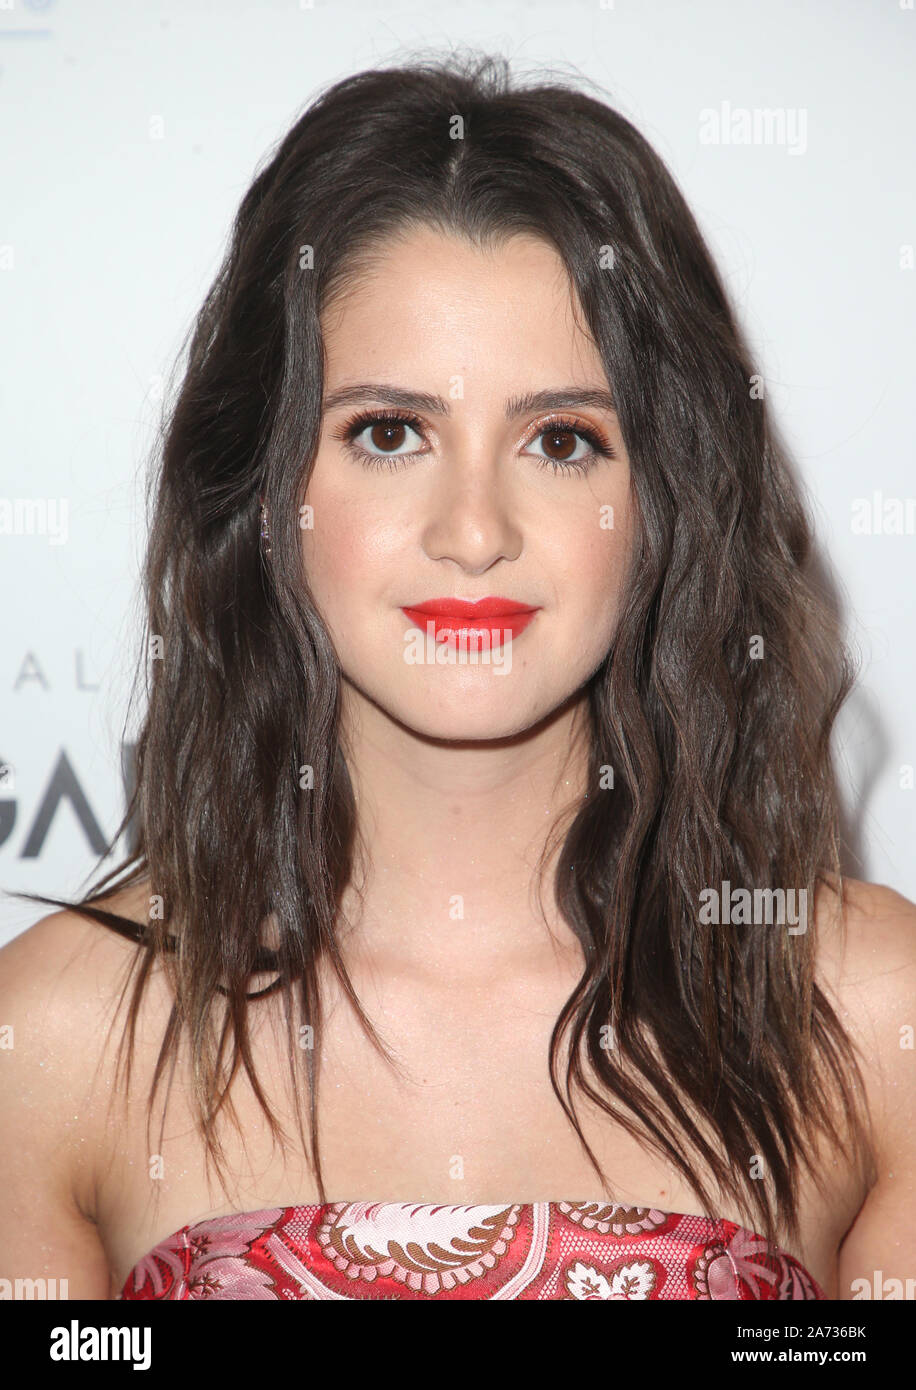 Thirst Project 10th Annual Thirst Gala Featuring Laura Marano Where